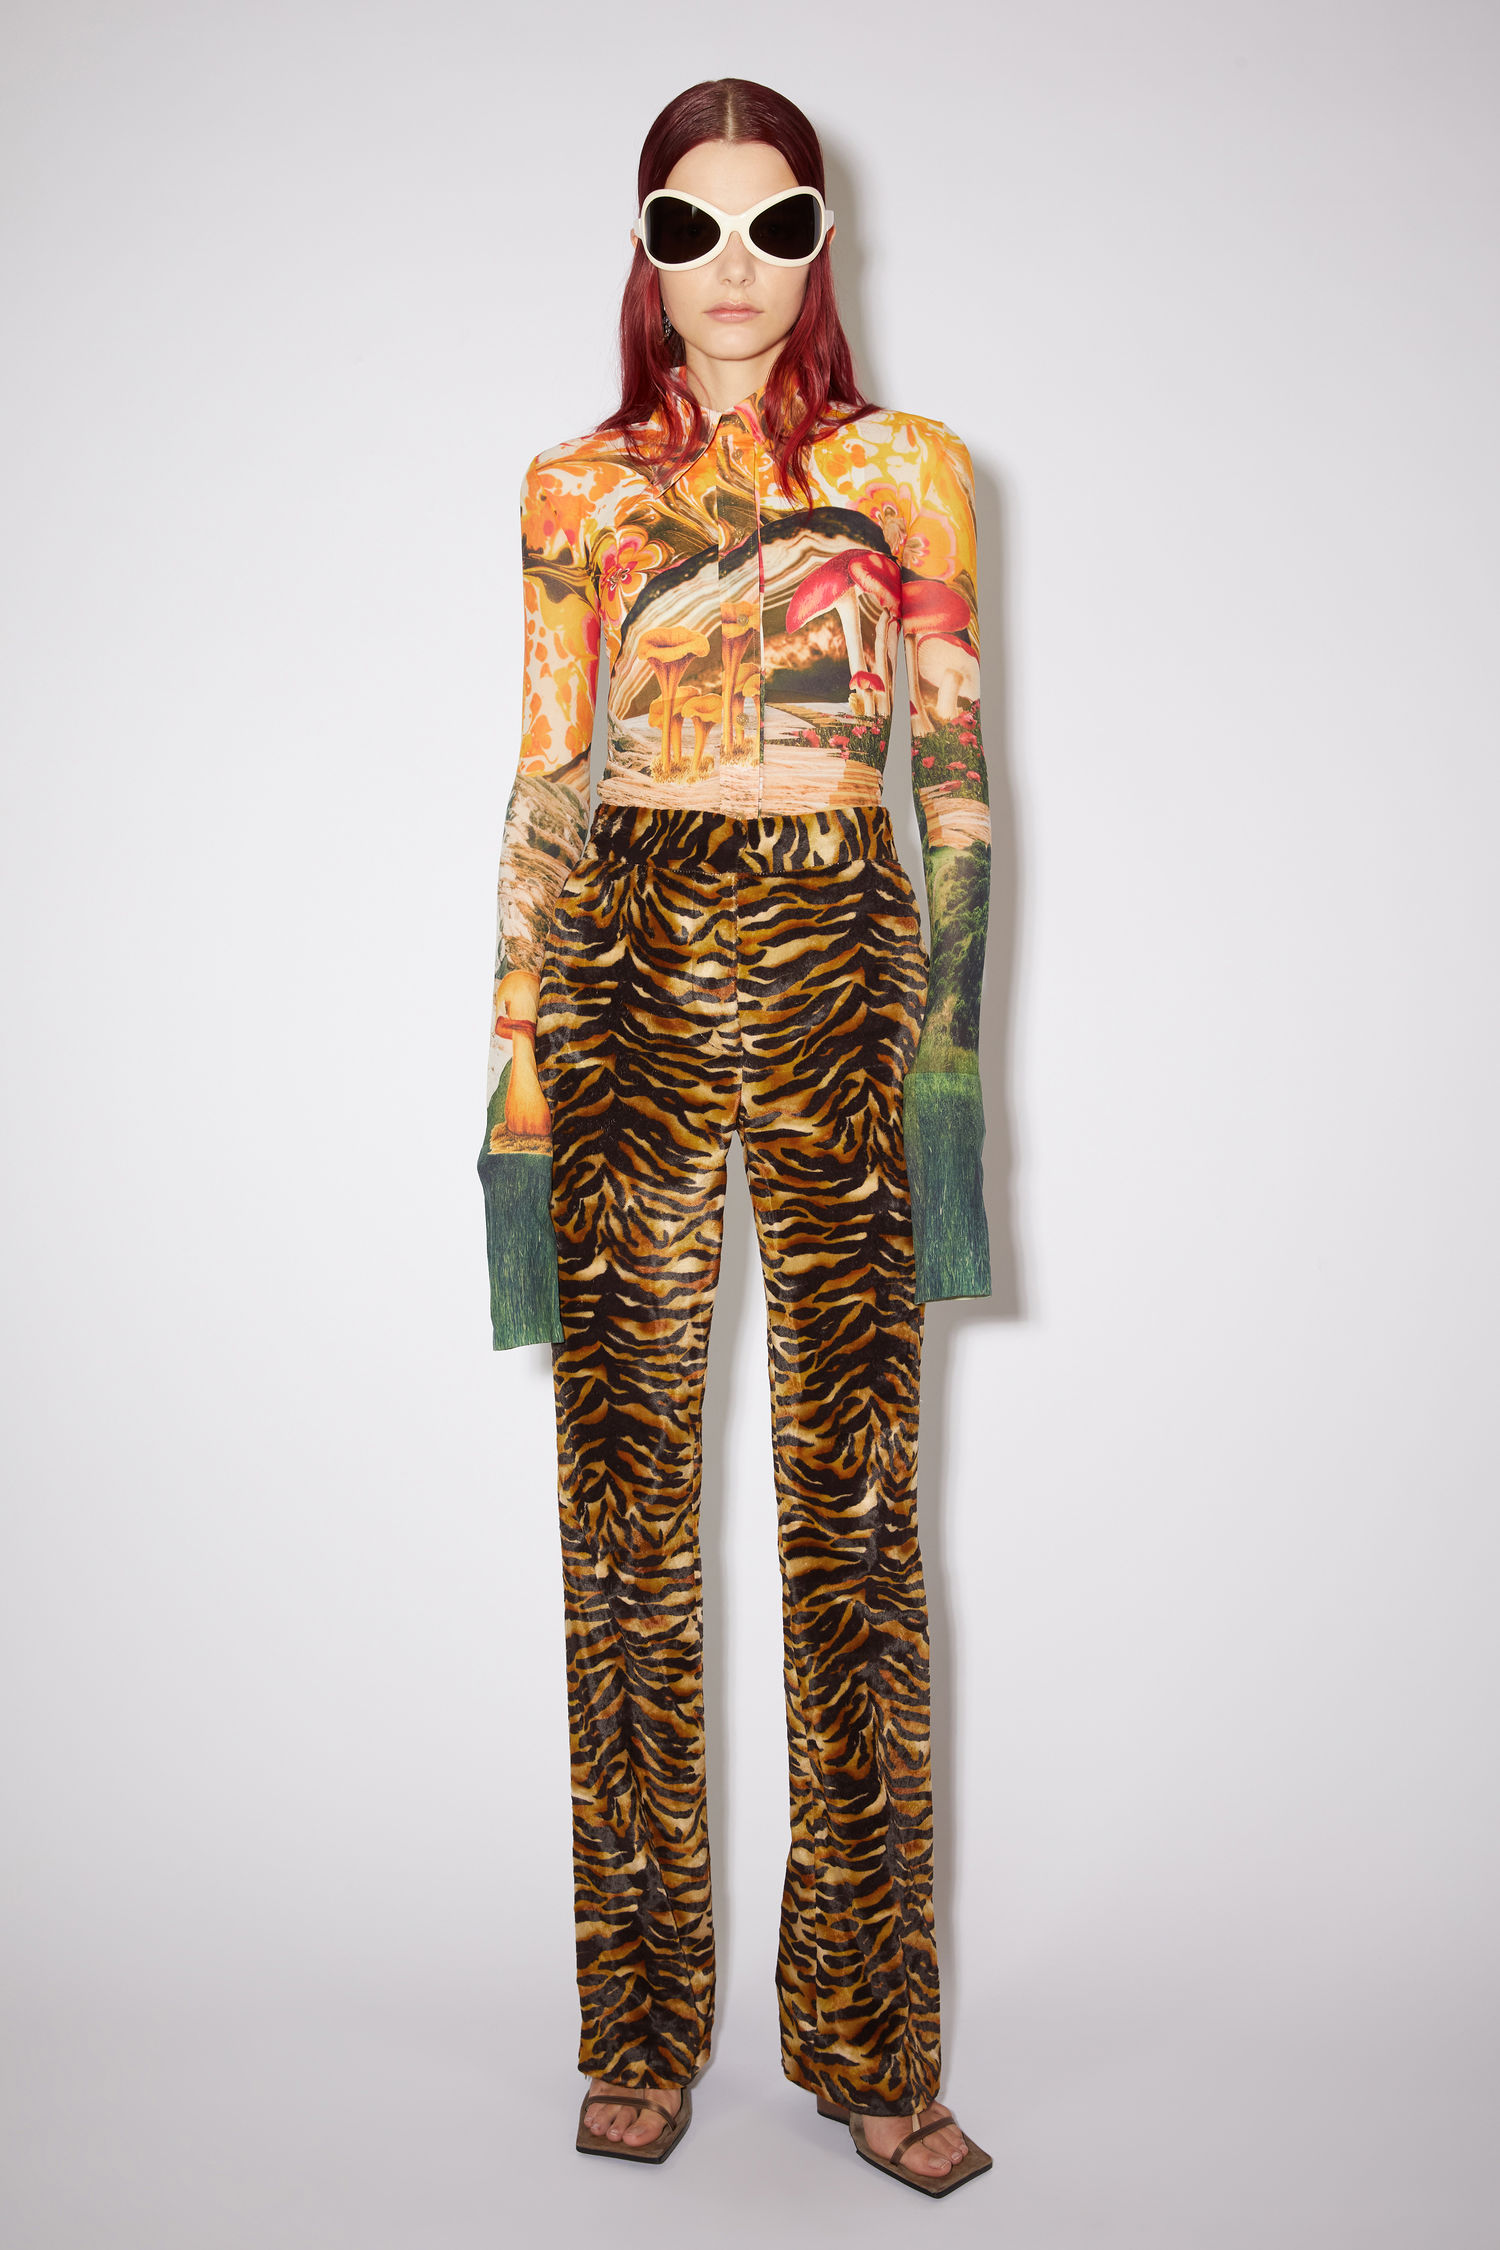 Acne Studios orange/black tailored trousers made of tiger print velvet with a tailored bootcut fit.